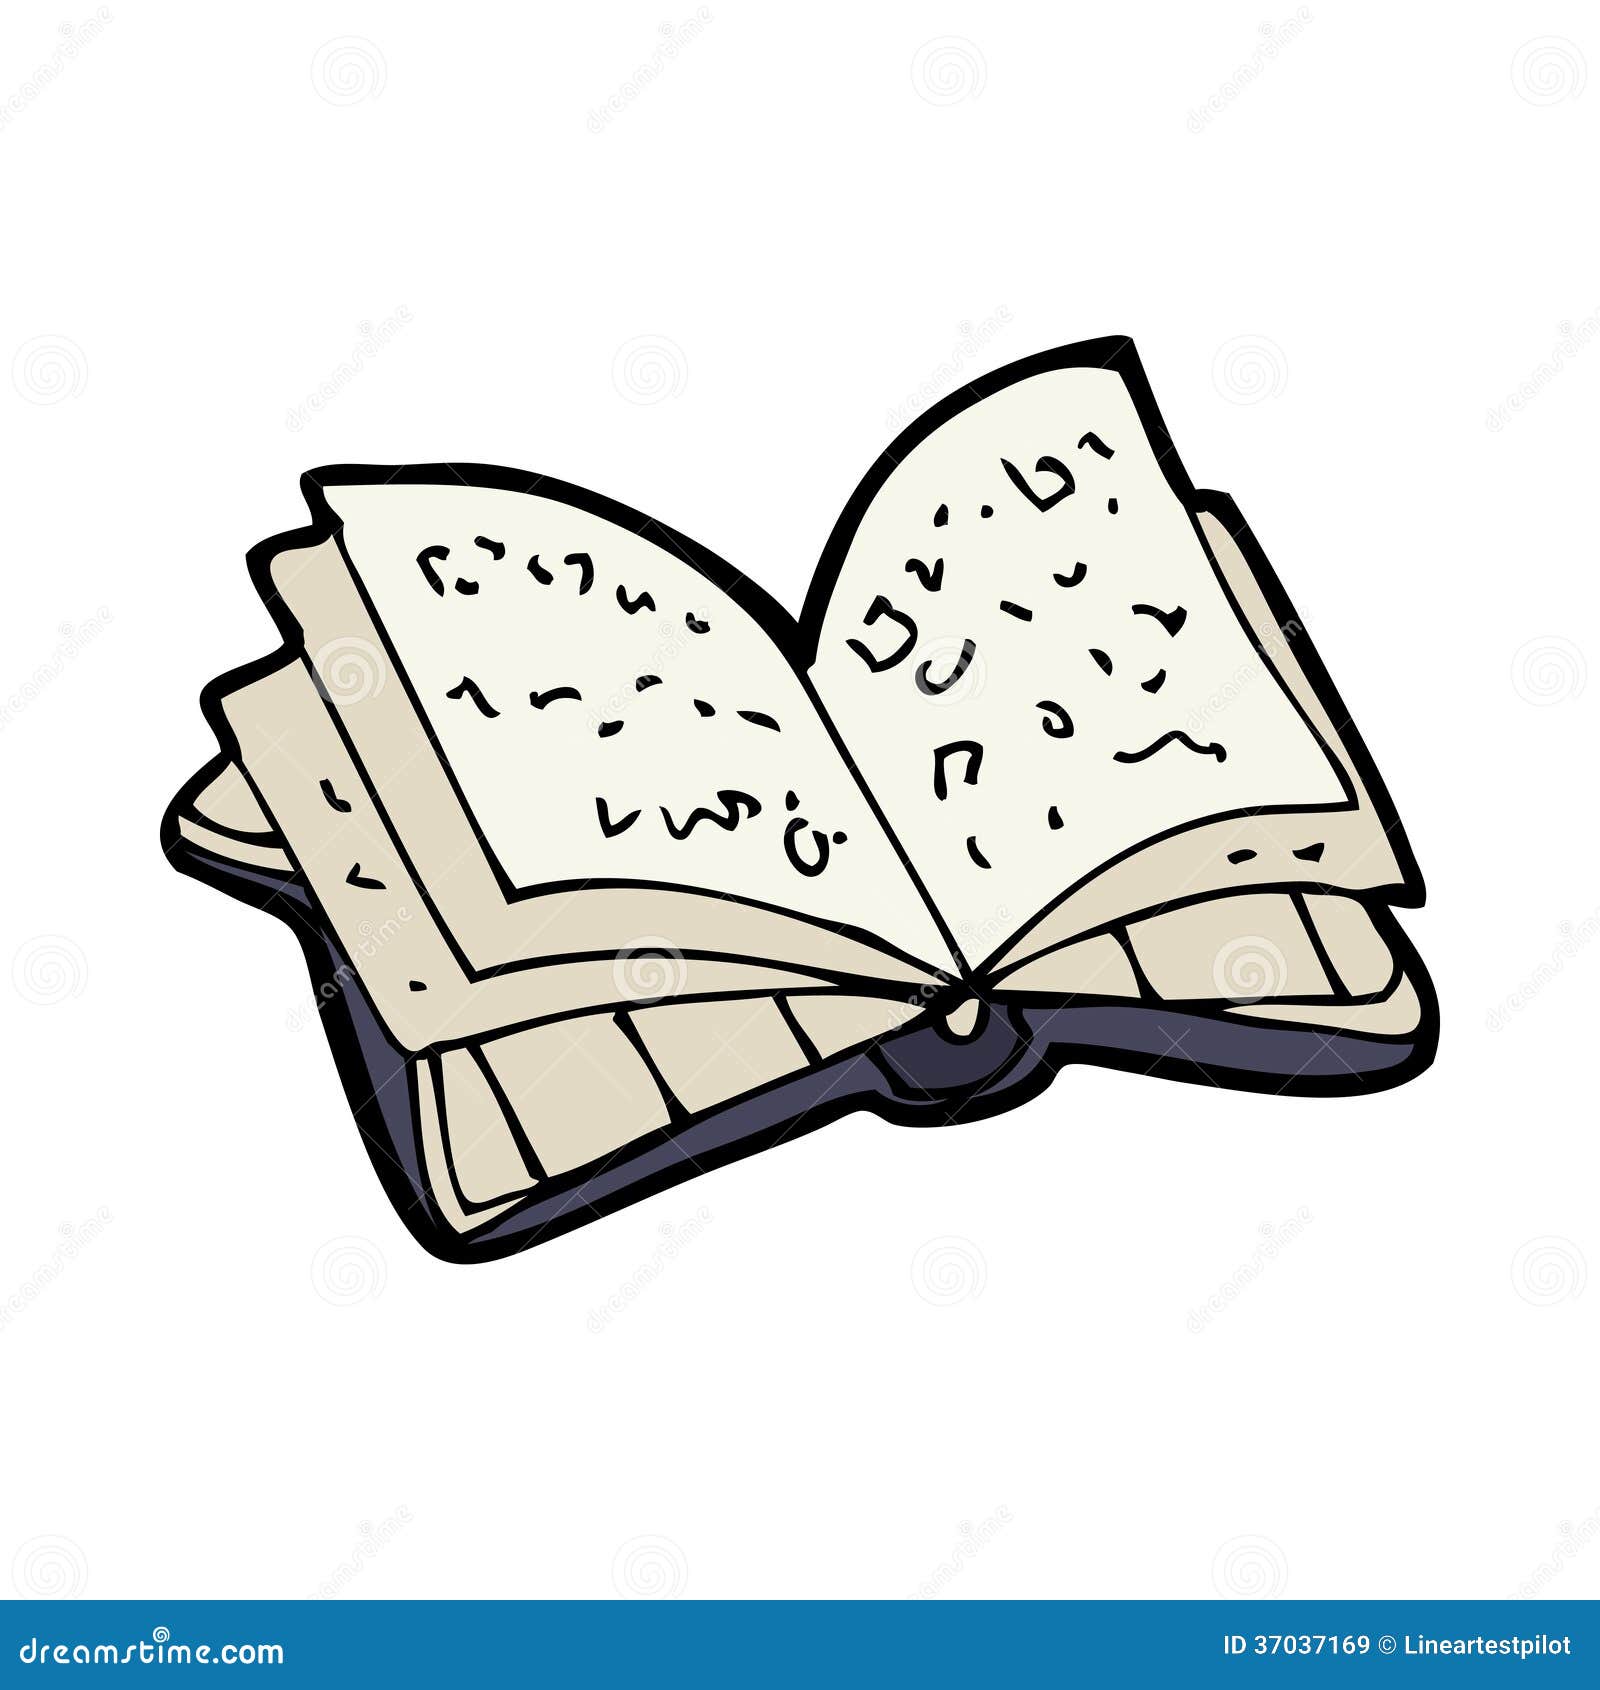 Cartoon Open Book Royalty Free Stock Images - Image: 37037169